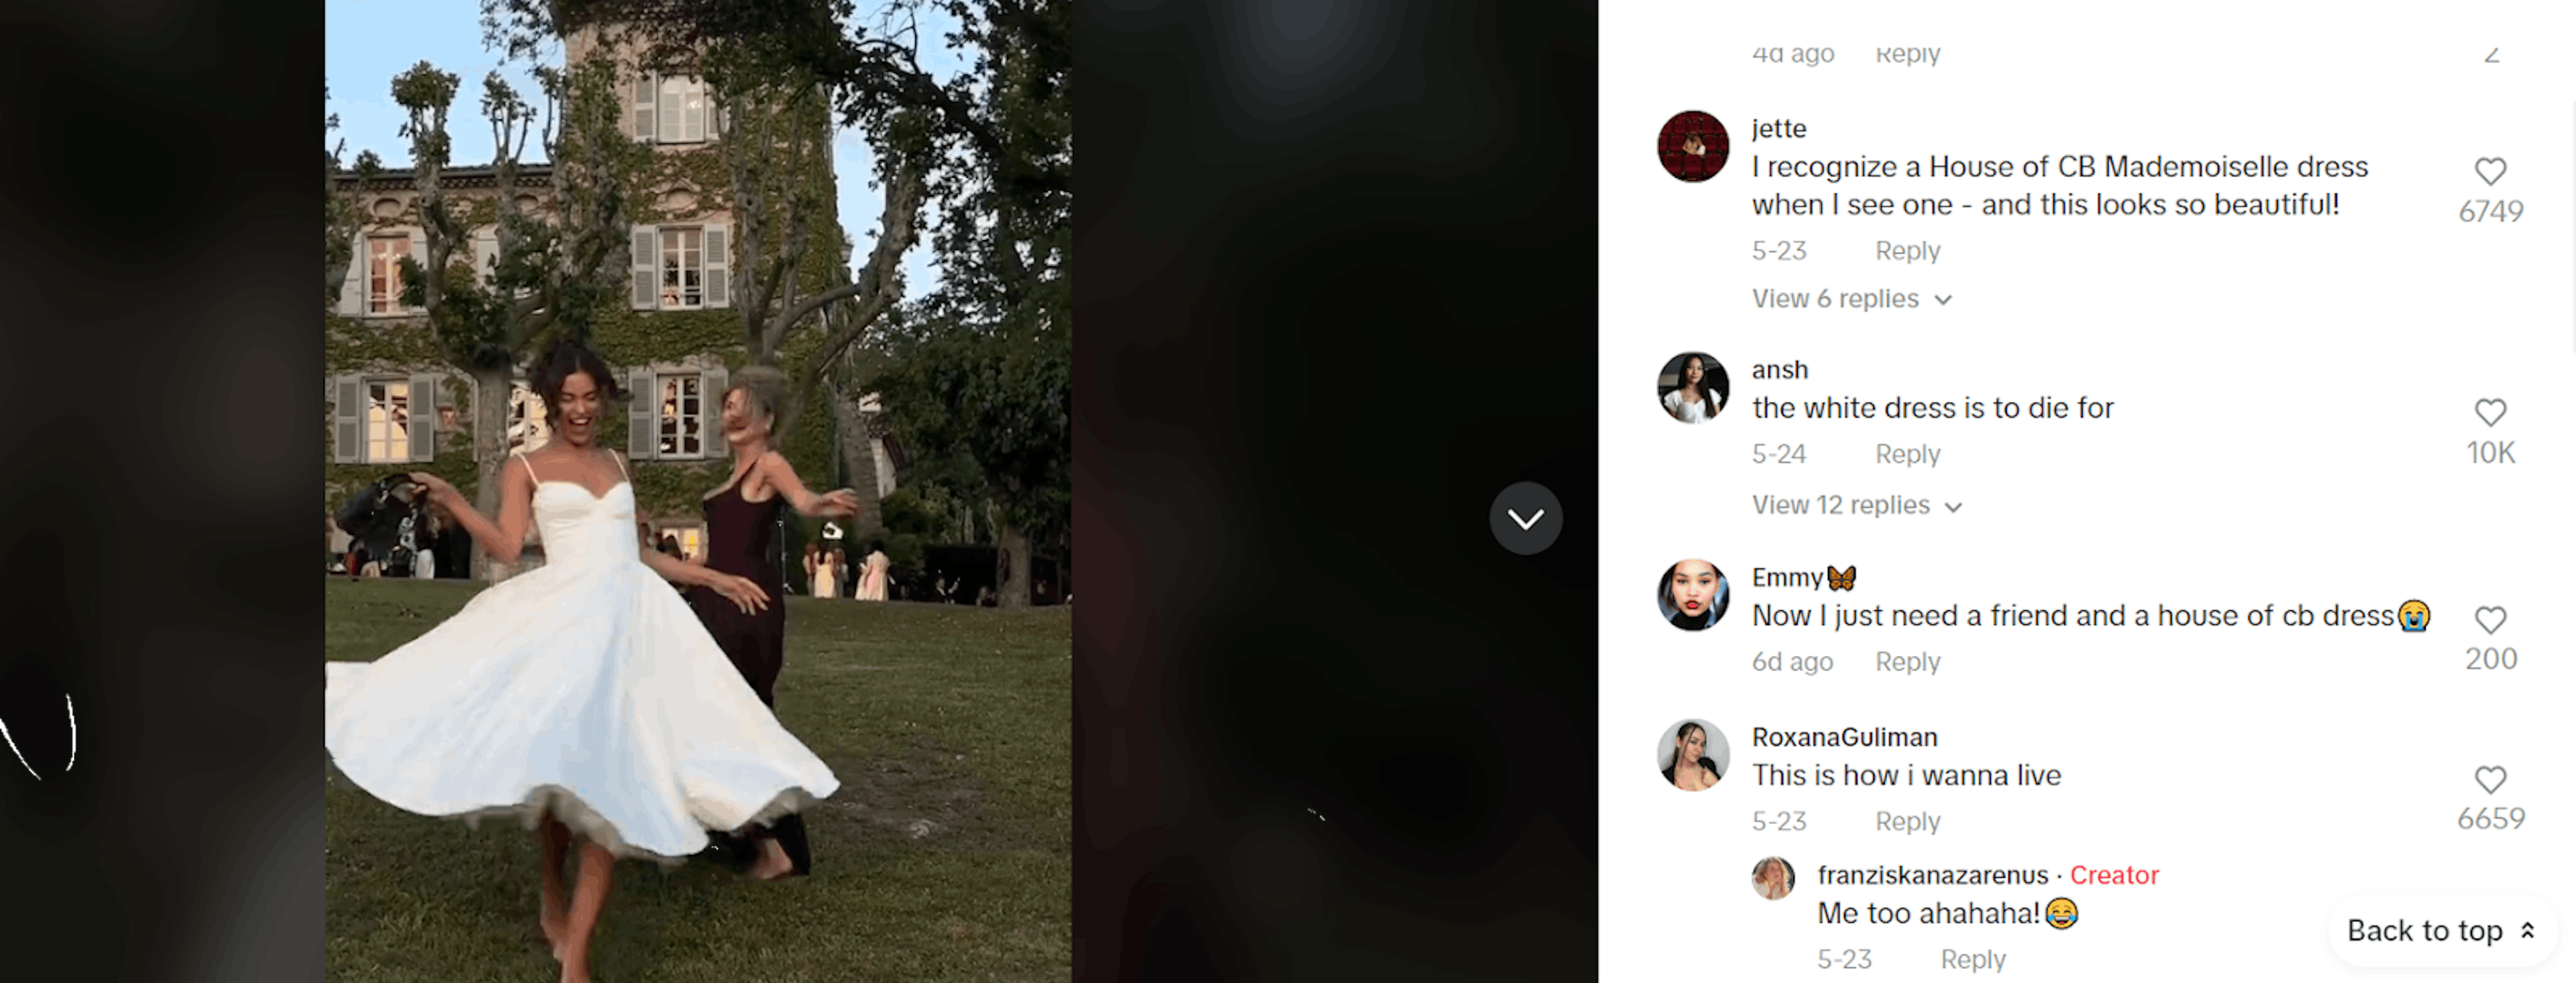 A TikTok user dancing to a song and comments trickling in about how great she was in the dress.